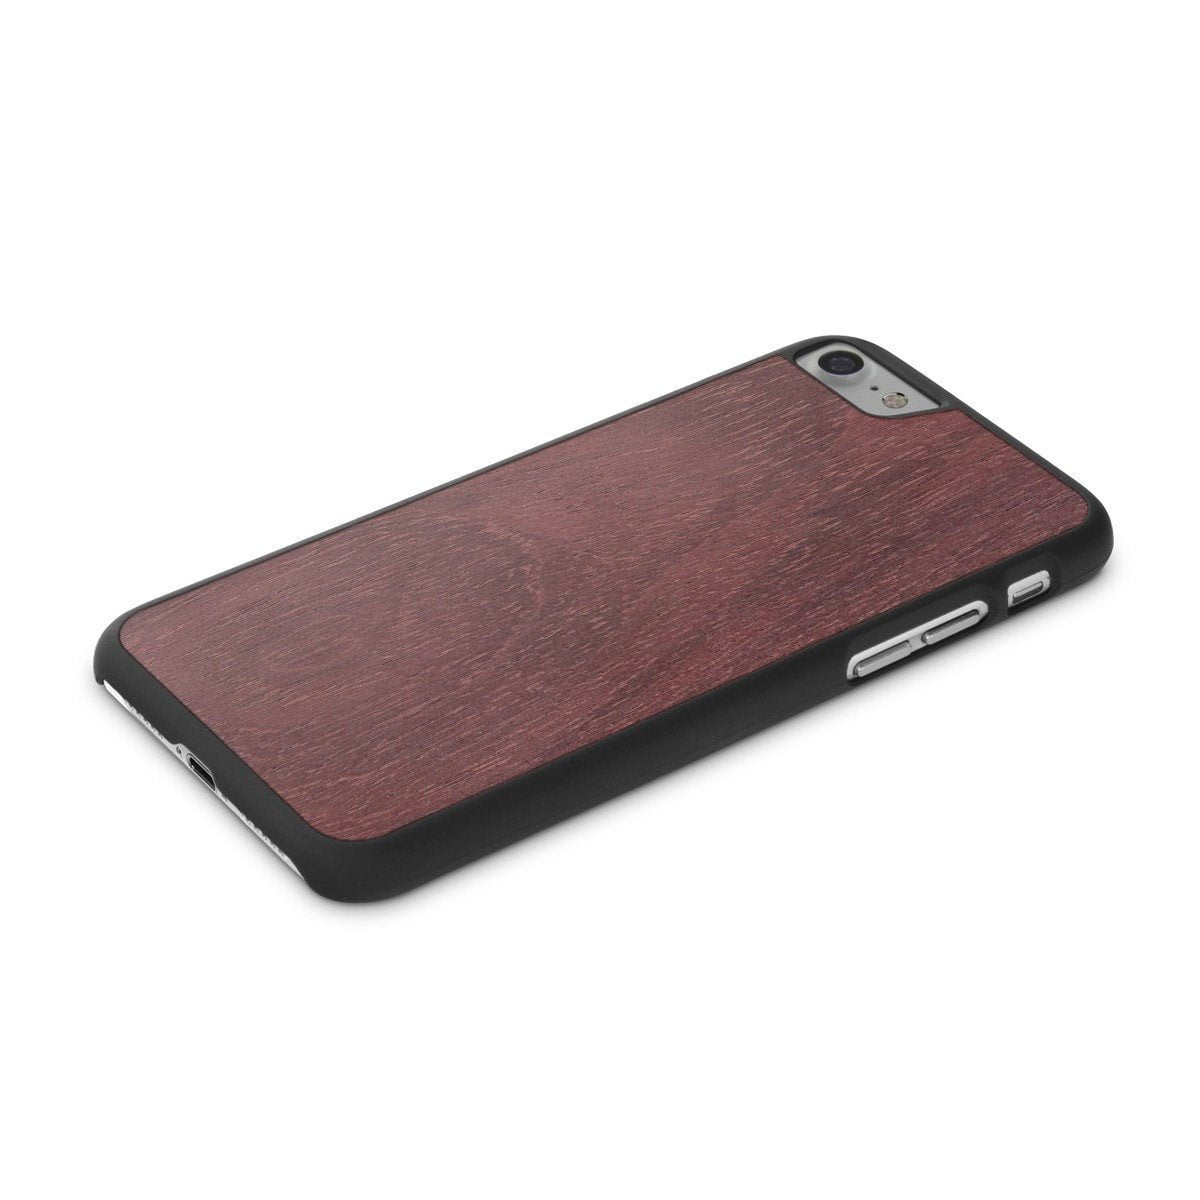  iPhone 7 —  #WoodBack Snap Case - Cover-Up - 5